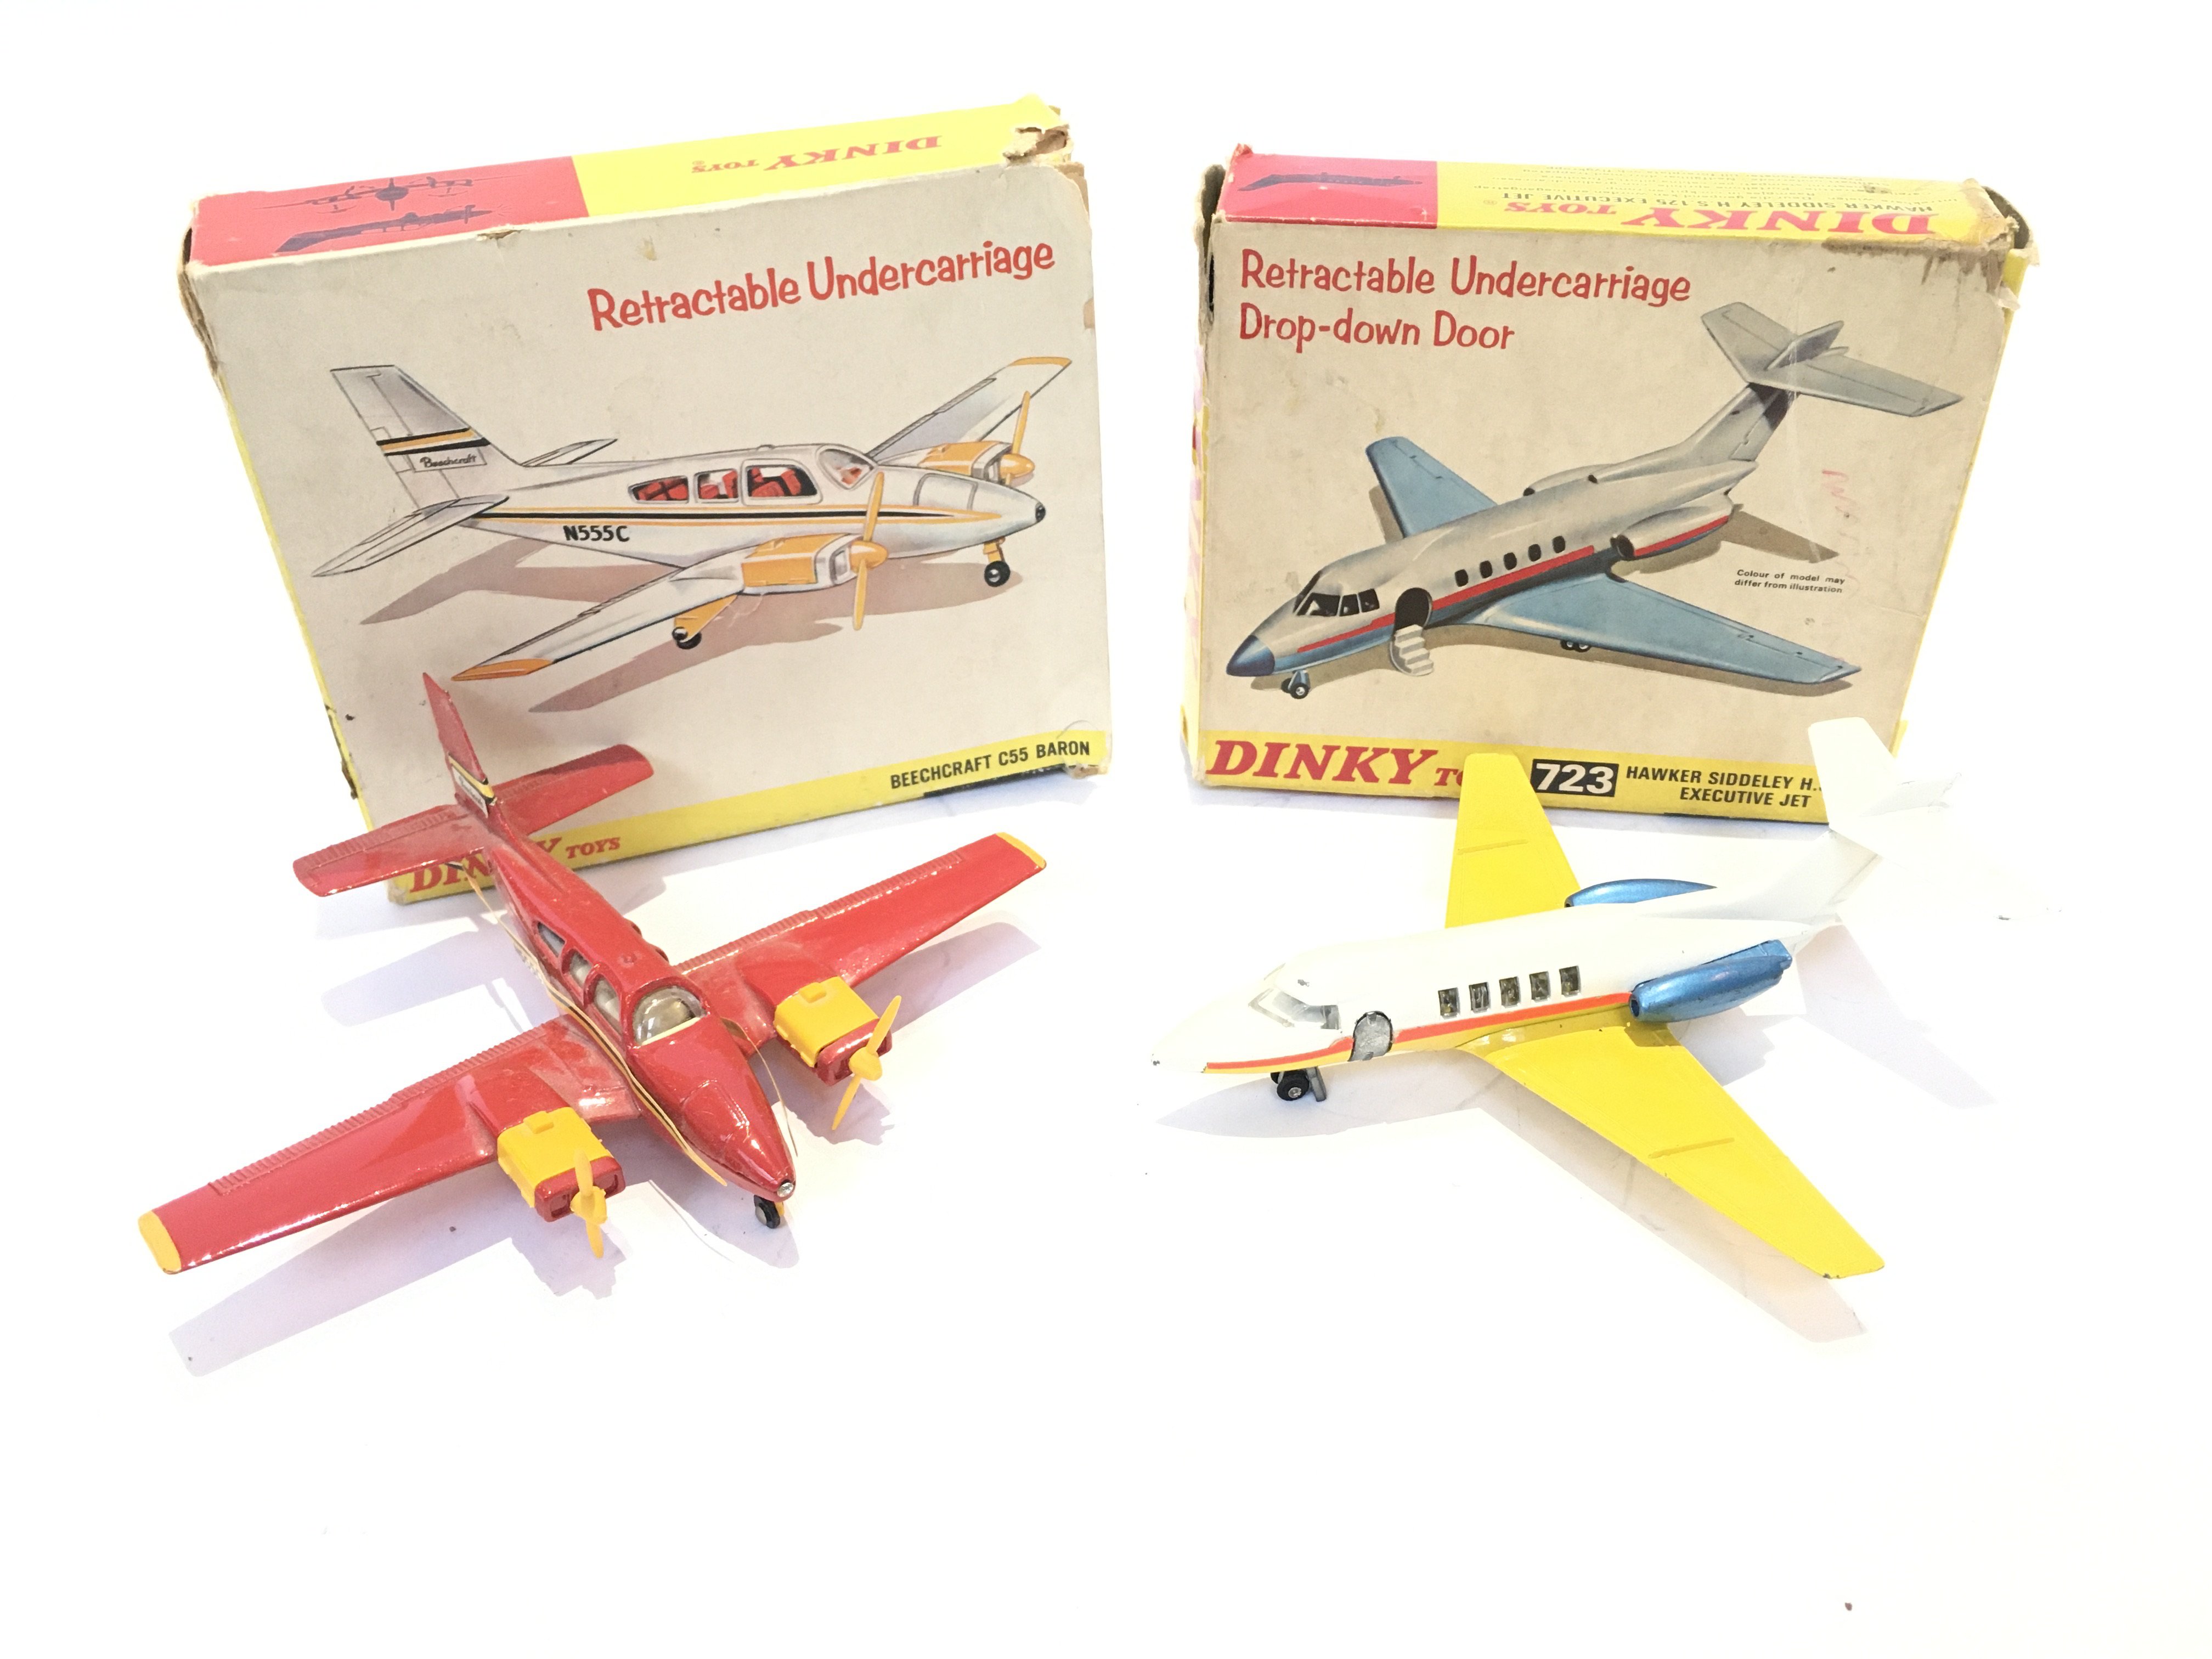 A Boxed Dinky Beechcraft C55 Baron #715. And a Haw